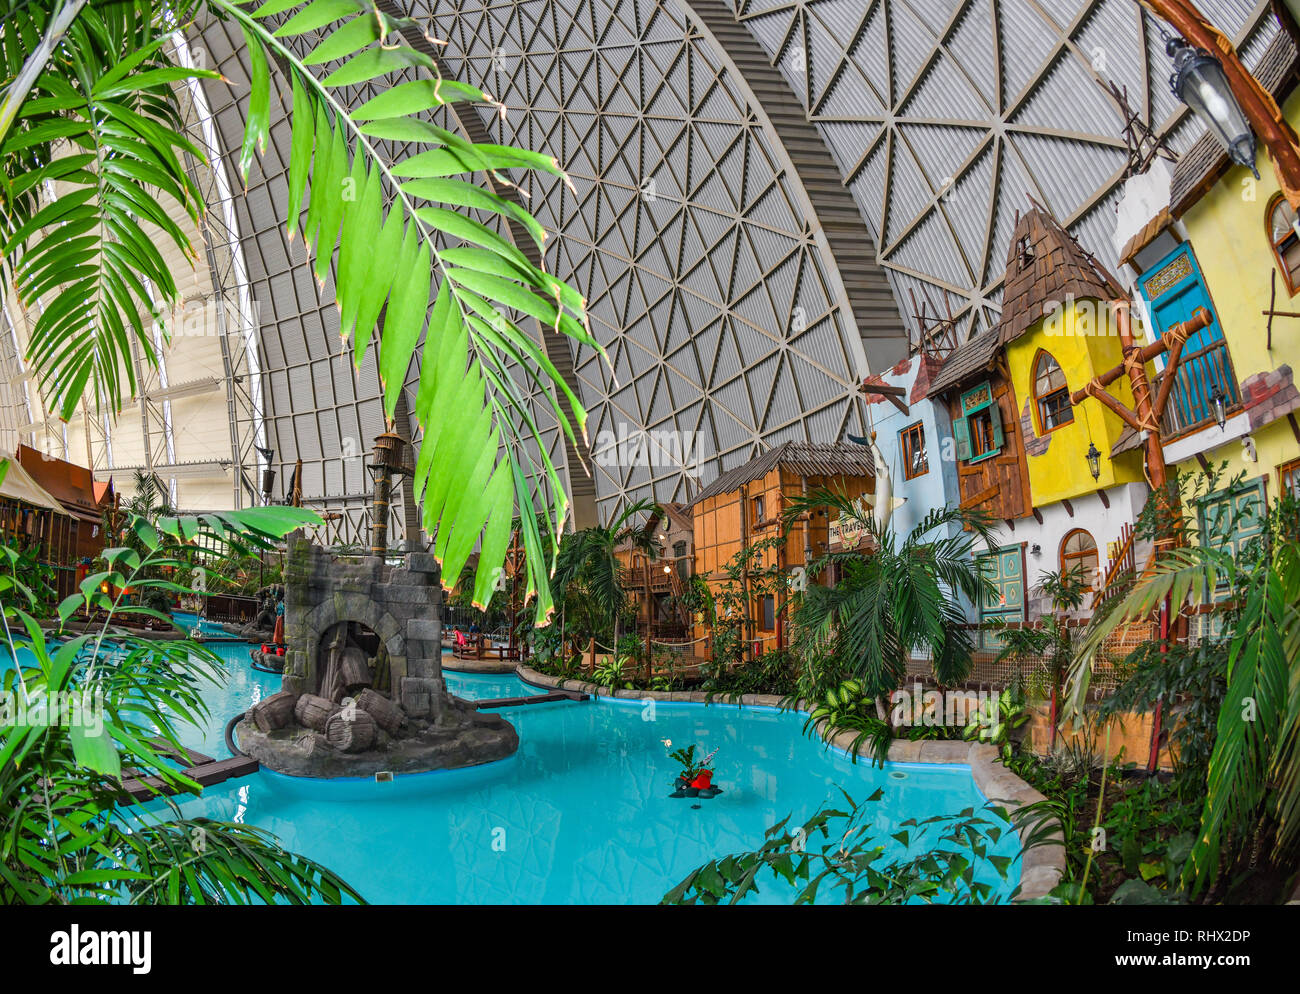 01 February 2019, Brandenburg, Krausnick: View into the tropical theme park of Tropical Islands. In 2018, around 1.2 million people visited the amusement park. Since 2004 it has been located in the former Cargolifter shipyard hall, which is considered the largest self-supporting hall in the world. Most of the visitors come from Germany, Poland, the Czech Republic, Denmark and the Netherlands. Tropical Island employs about 640 people. In addition, there are another 100 external employees. ATTENTION: For editorial use only in connection with reporting on Tropical Islands. Release exclusively for Stock Photo